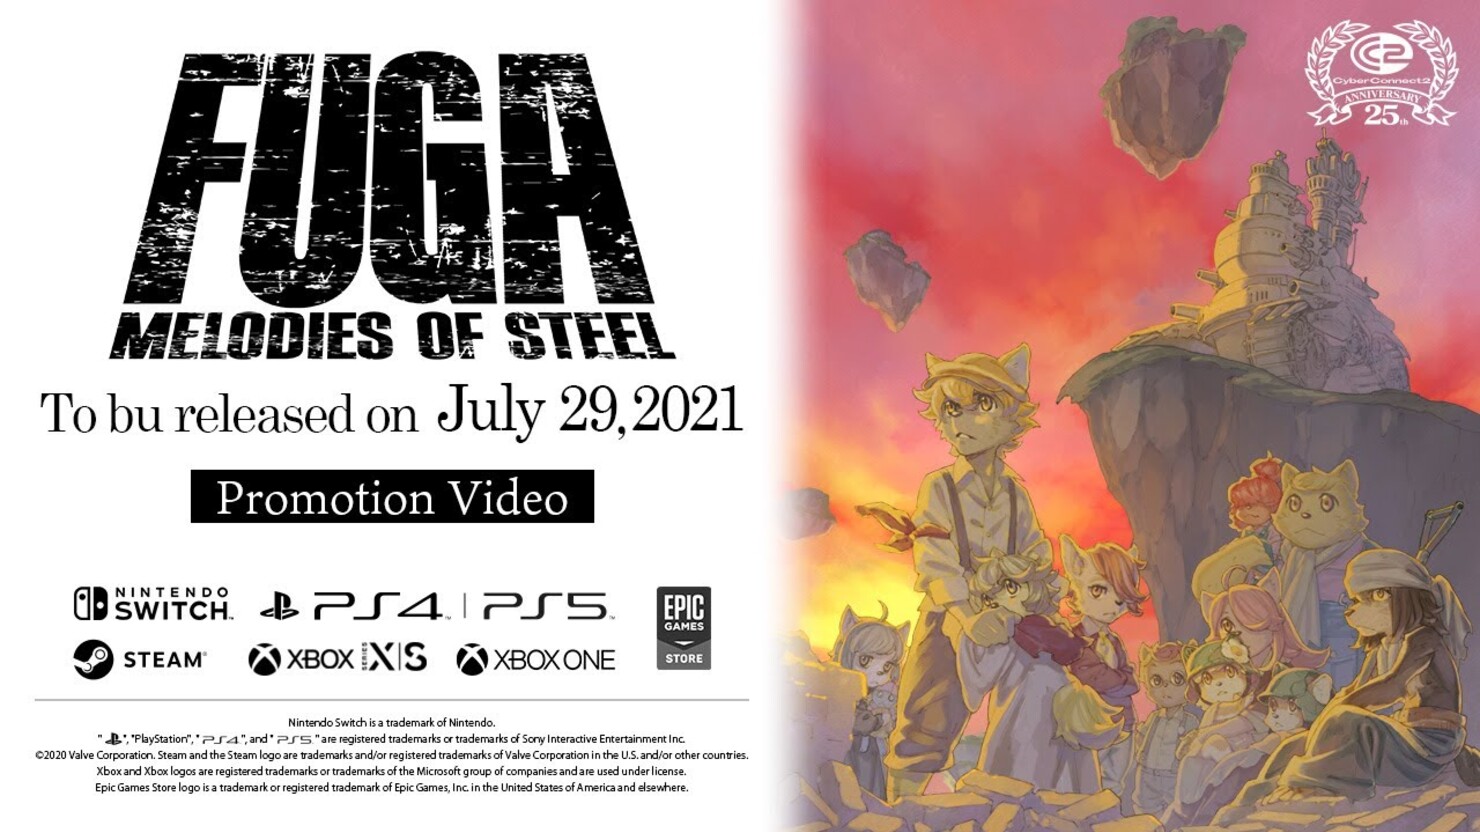 Fuga melodies of steel steam фото 44